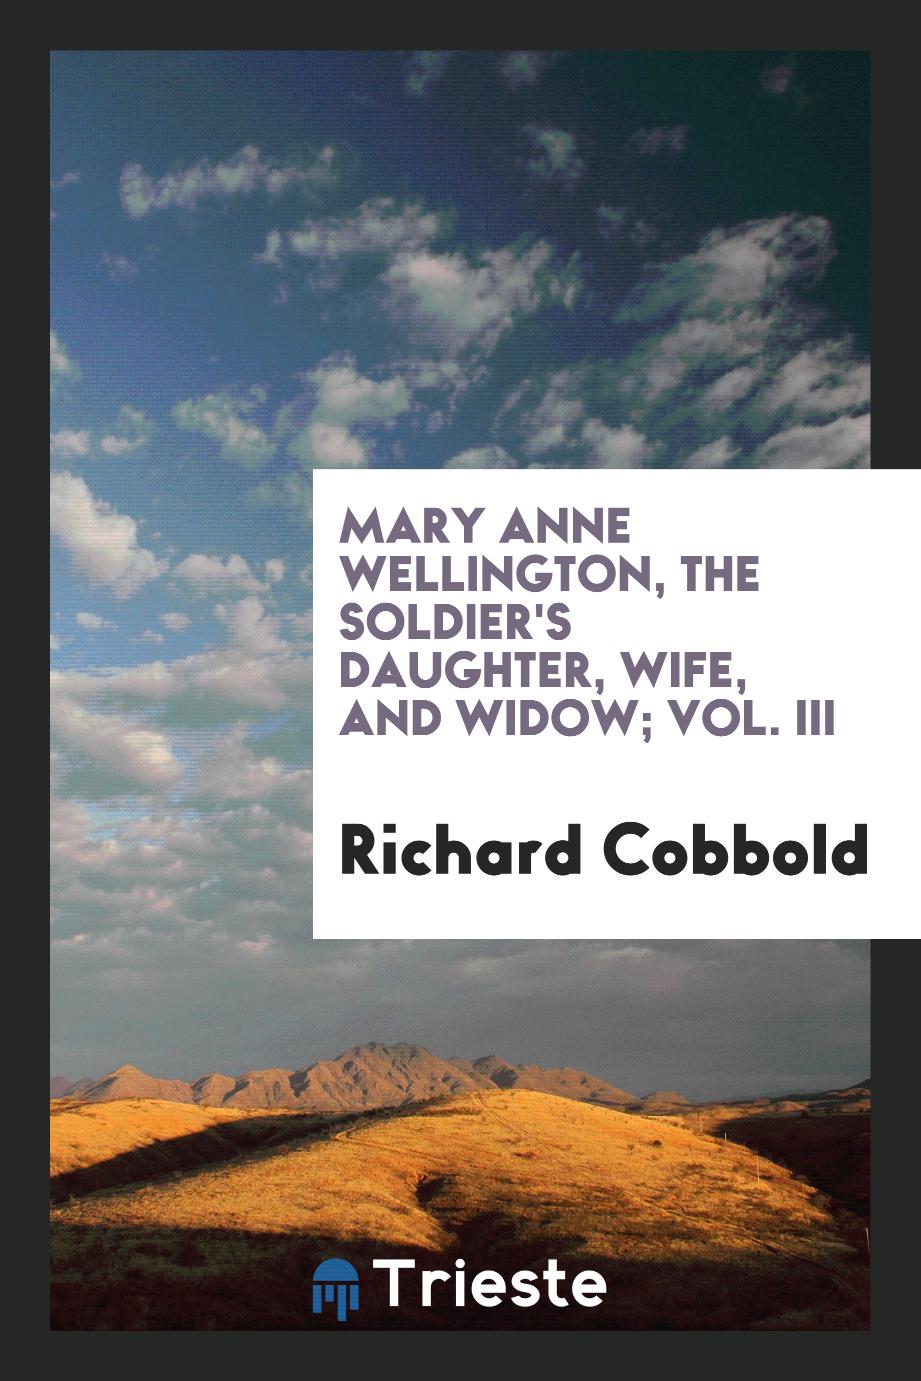 Mary Anne Wellington, the soldier's daughter, wife, and widow; Vol. III